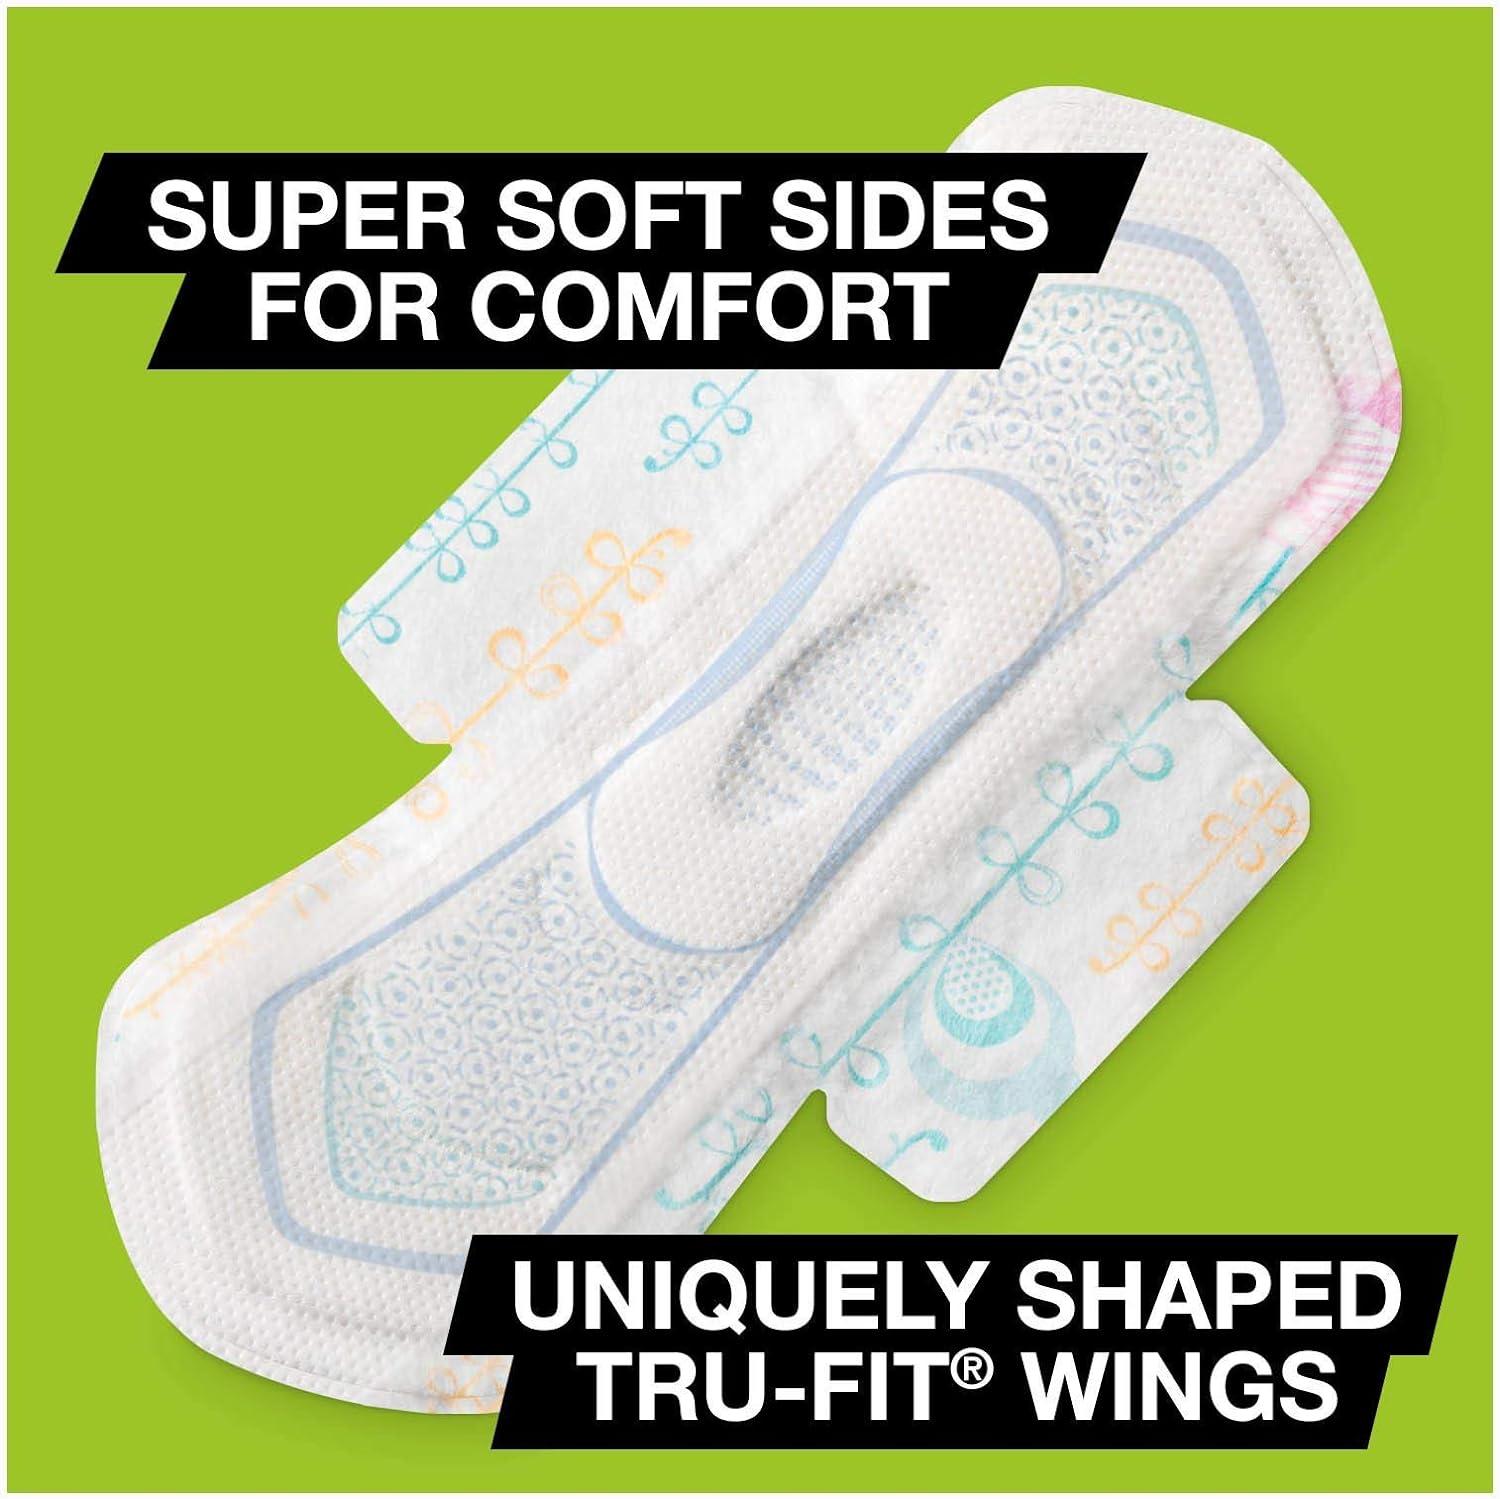 U by Kotex Clean Wear Ultra Thin Pads With Wings Regular